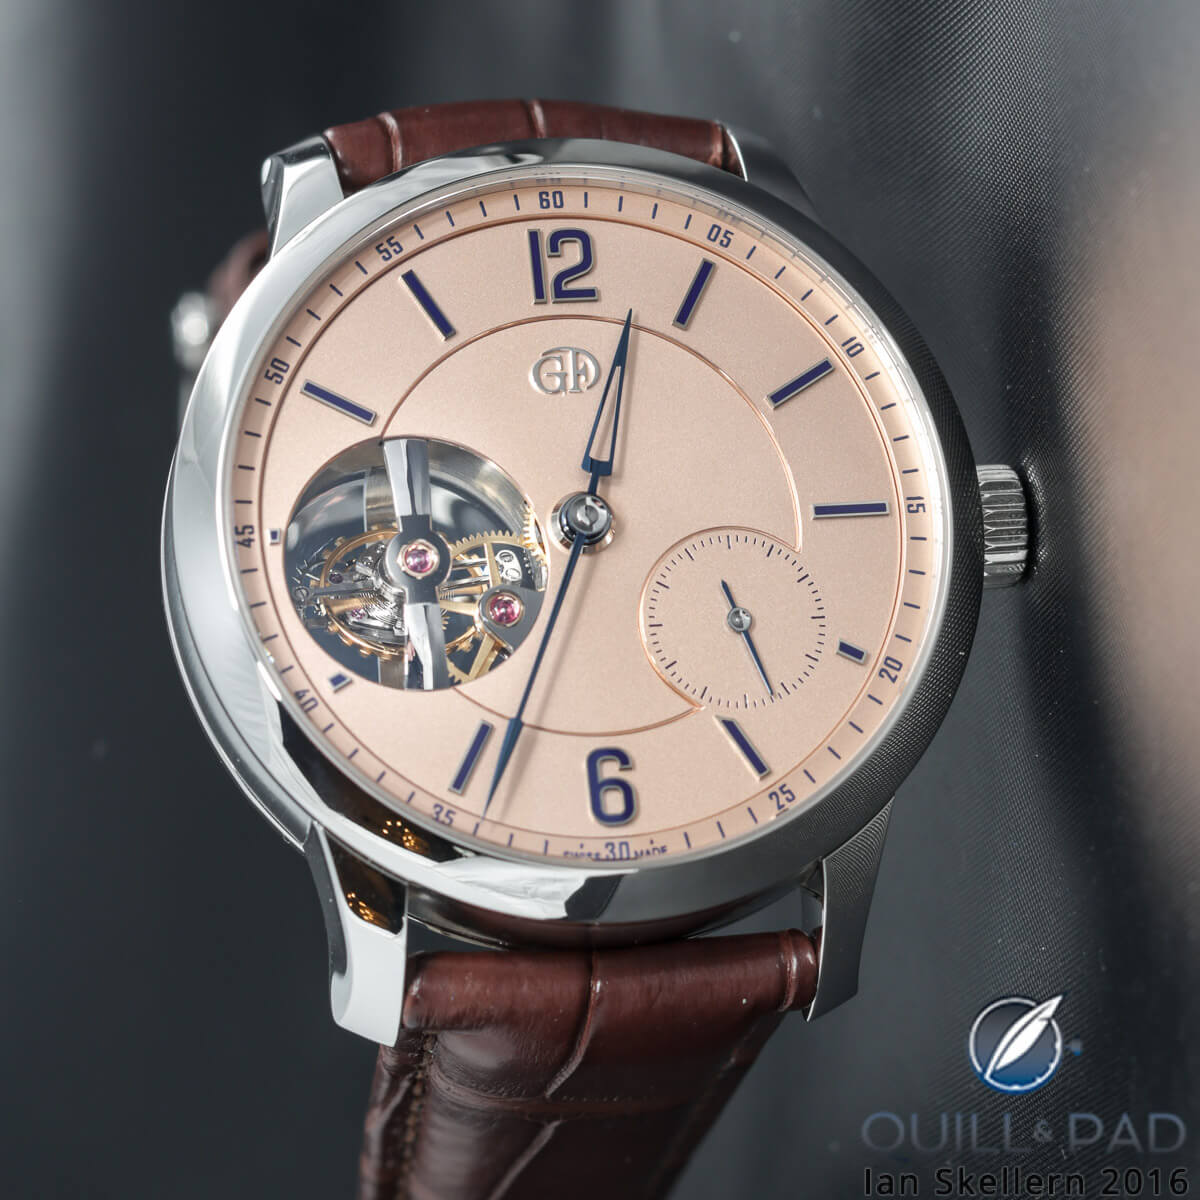 Greubel Forsey Tourbillon 24 Seconds Vision in platinum with salmon-colored dial